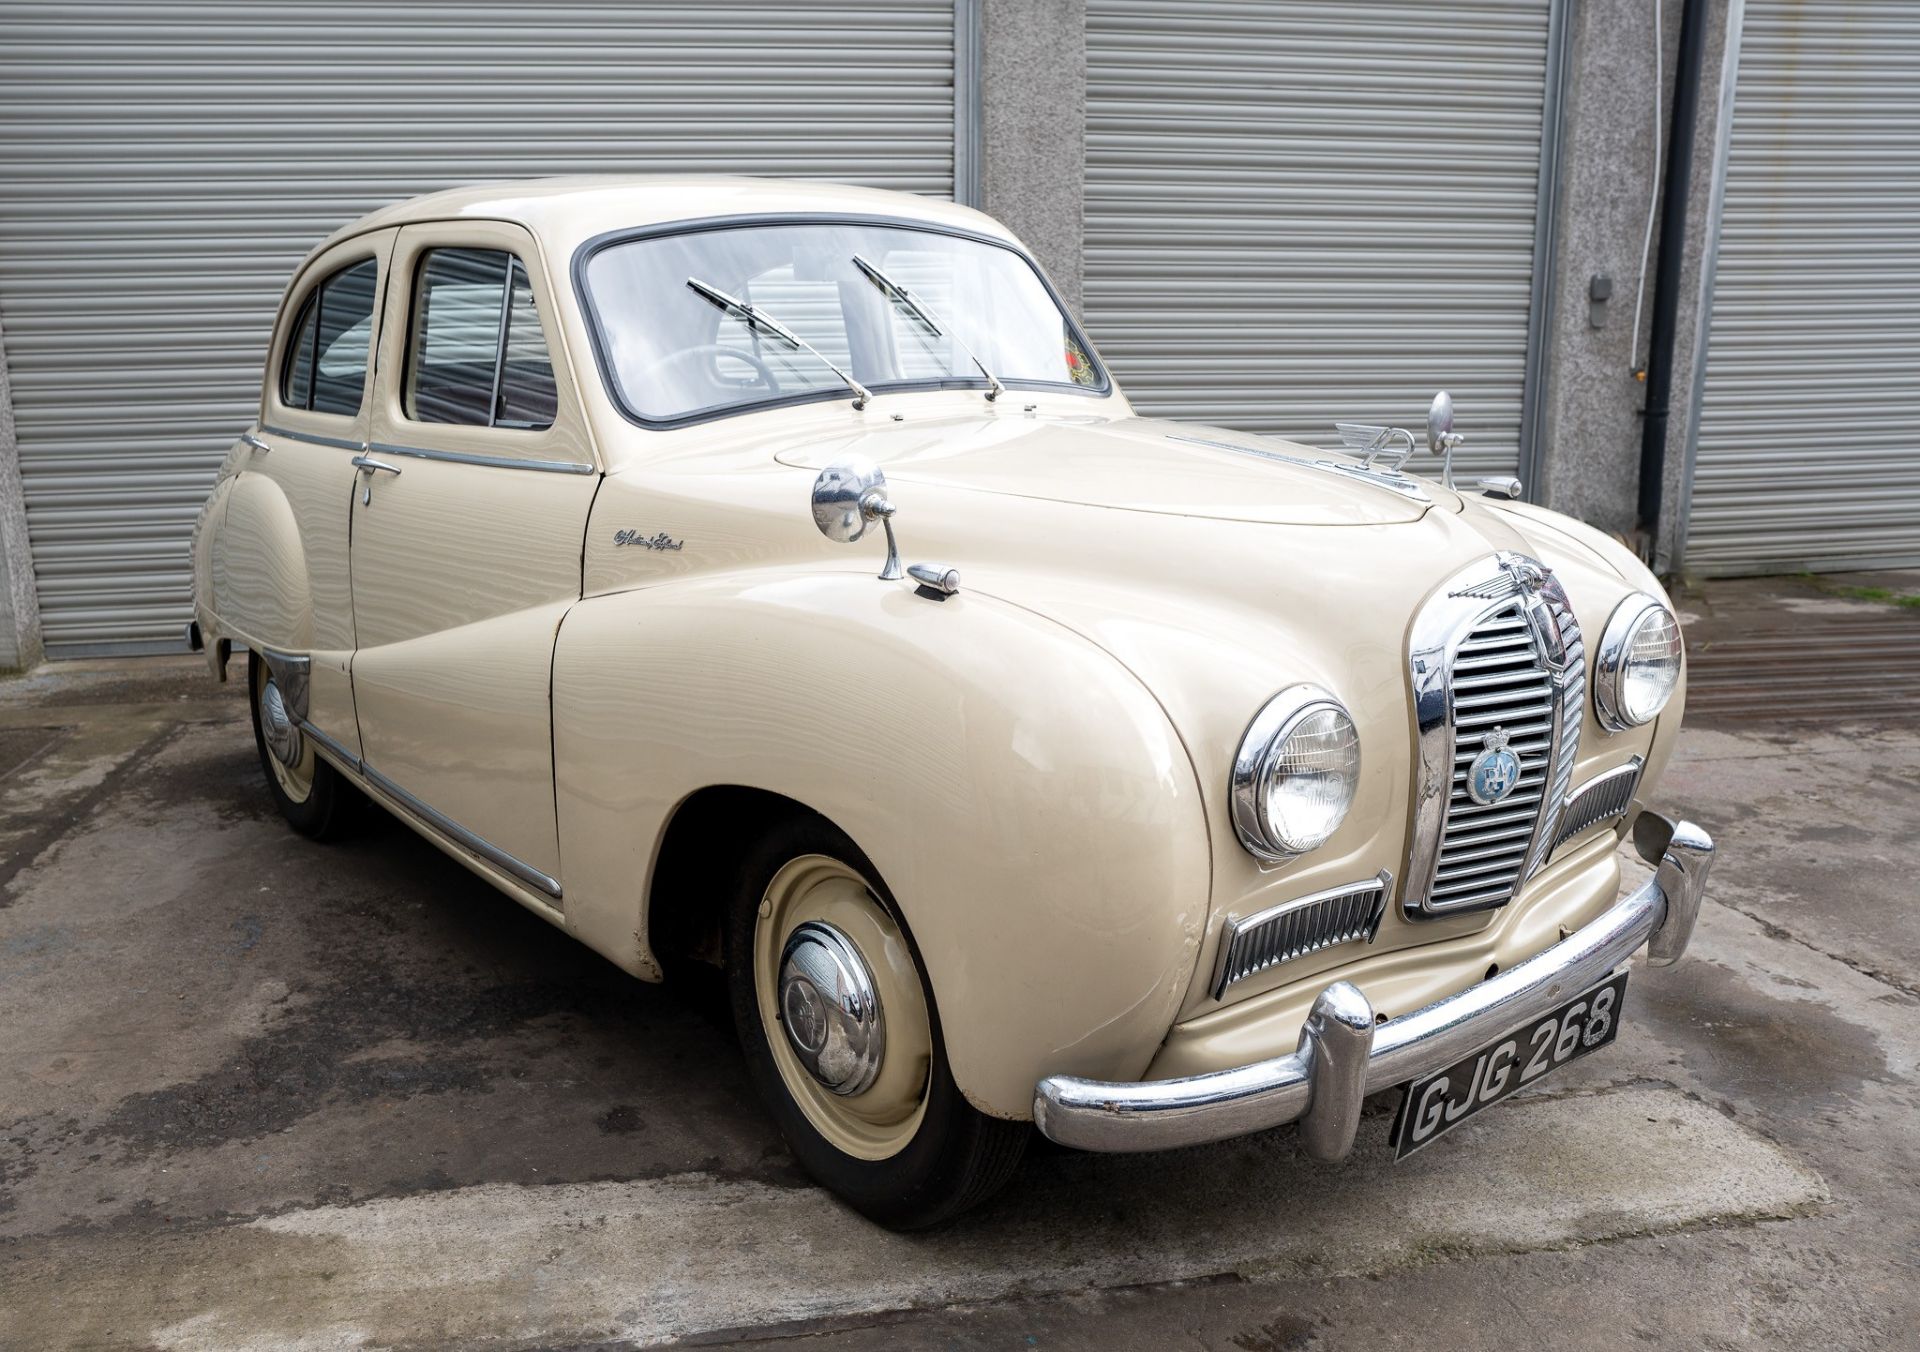 1952 AUSTIN A40 SOMERSET Registration Number: GJG 268 Chassis Number: TBA The A40 Somerset was